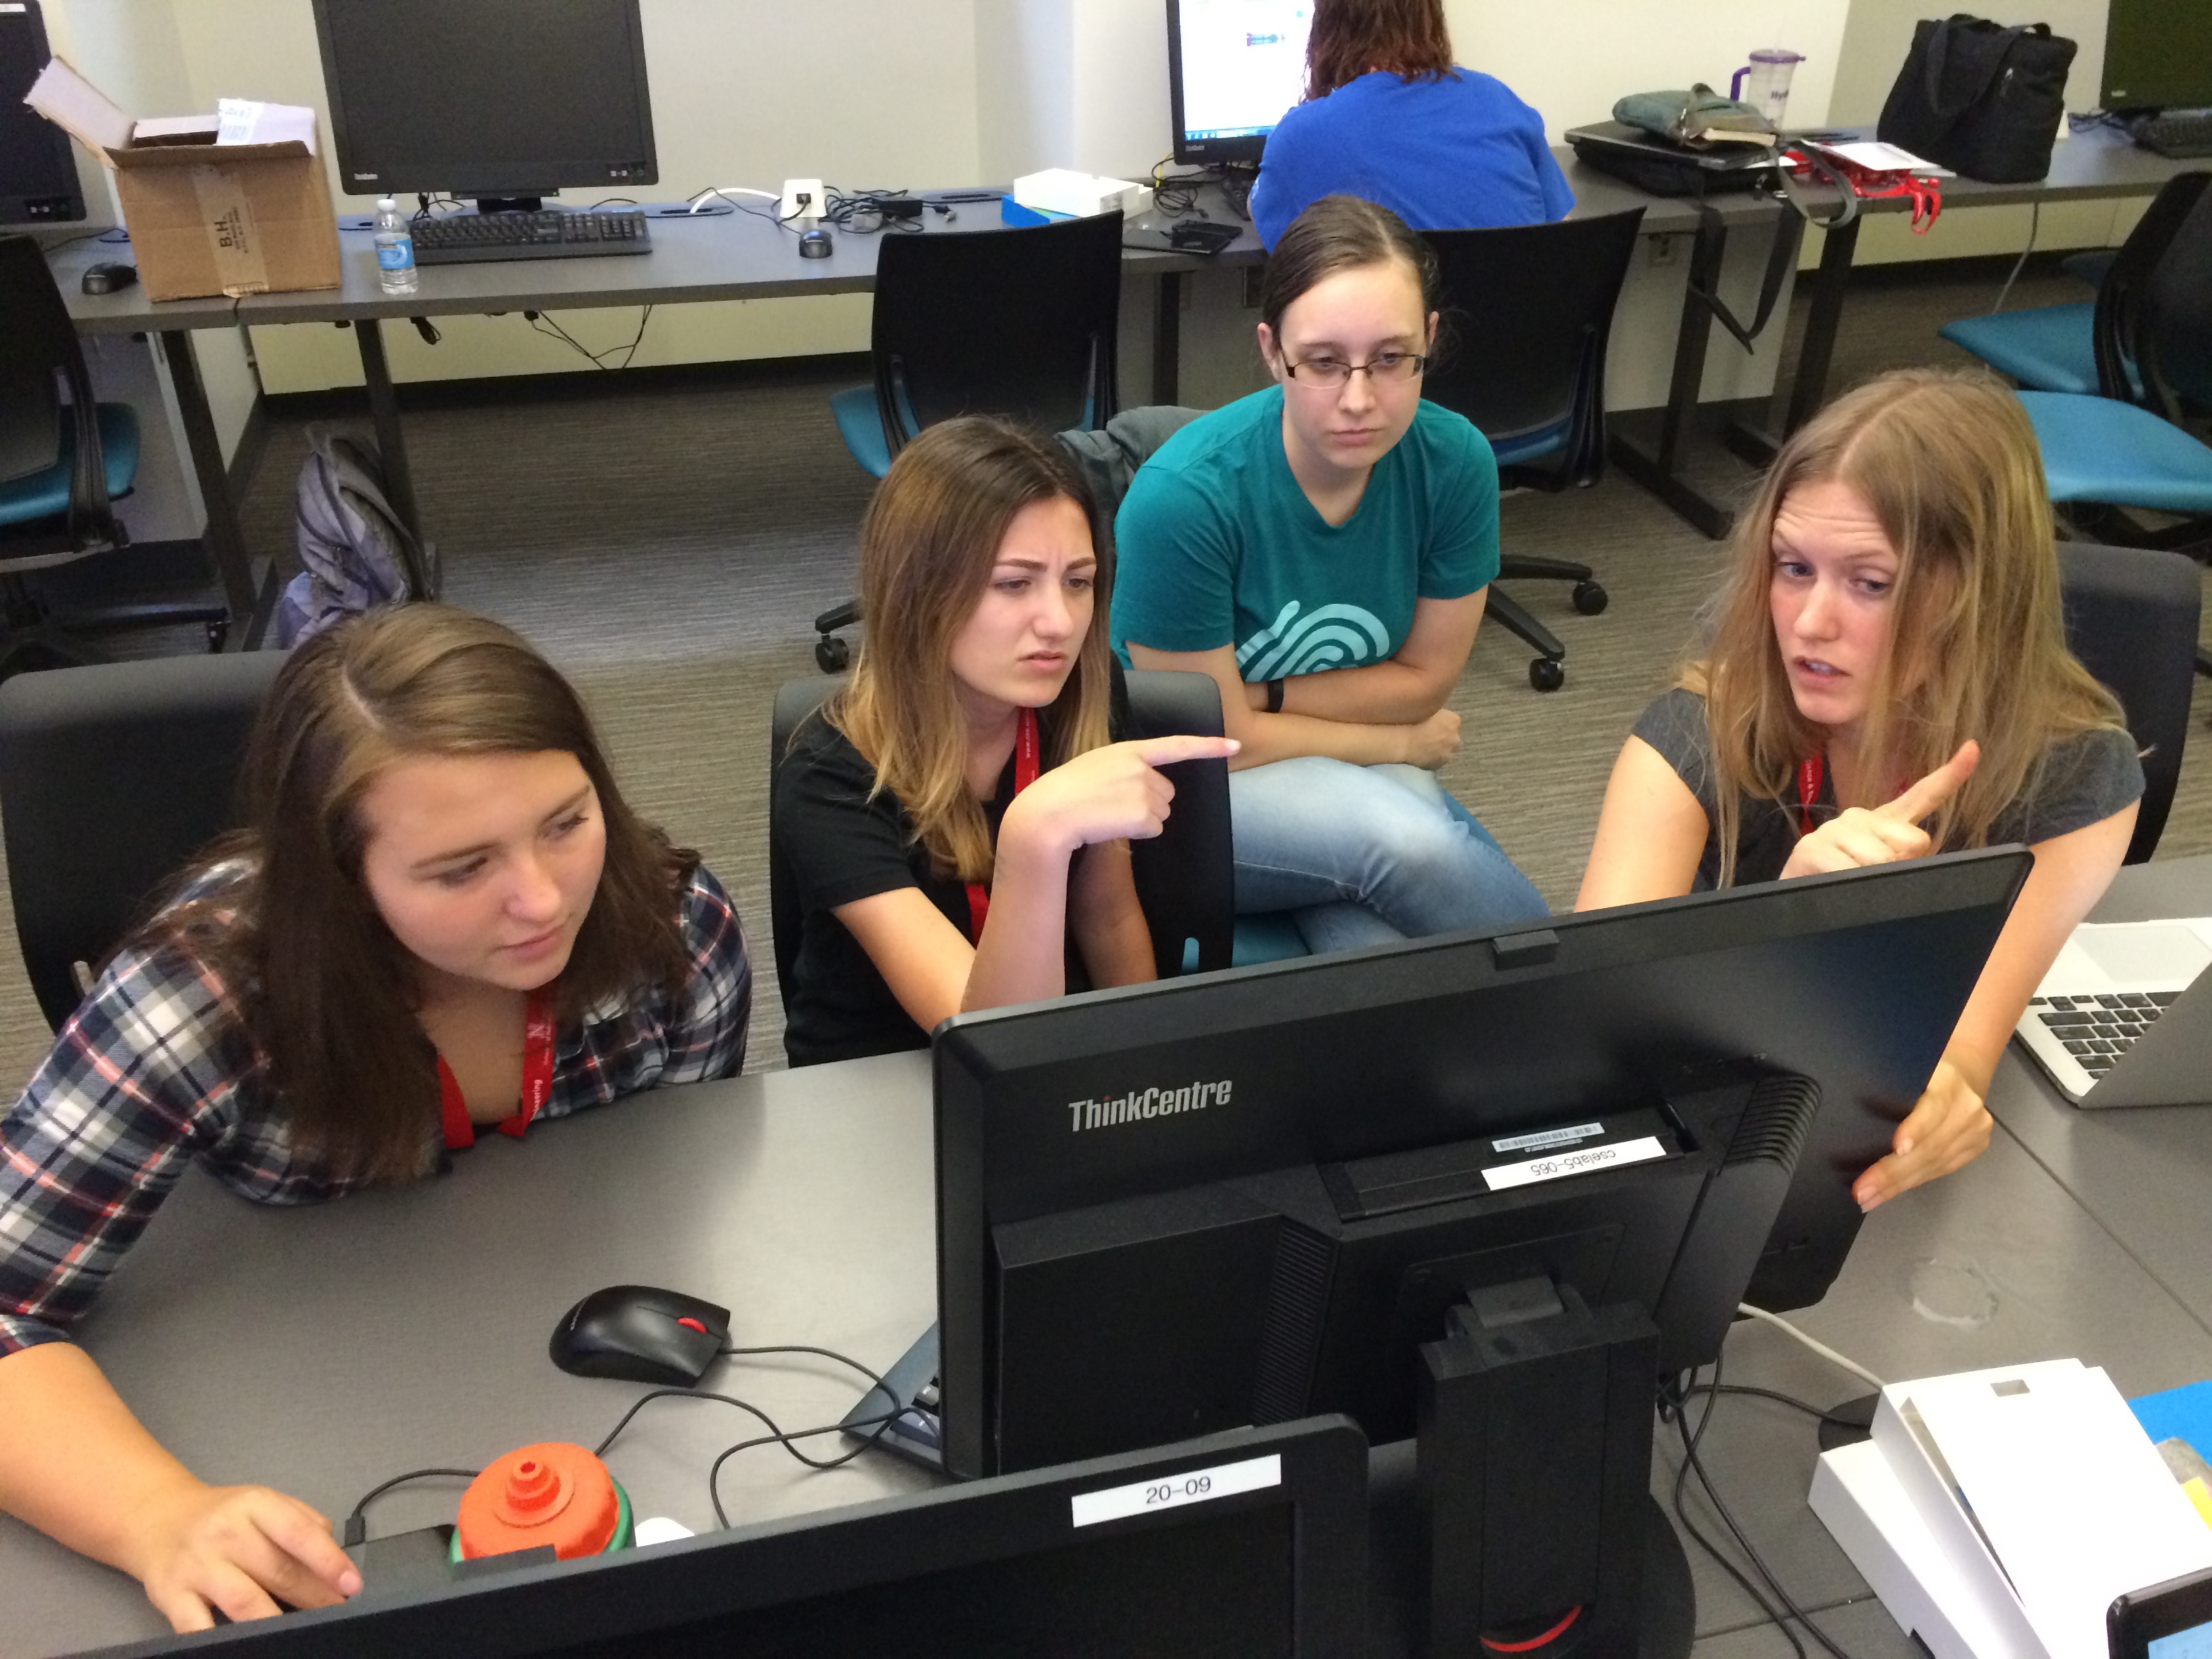 Girl Scouts build an app together at the CSE computer camp.